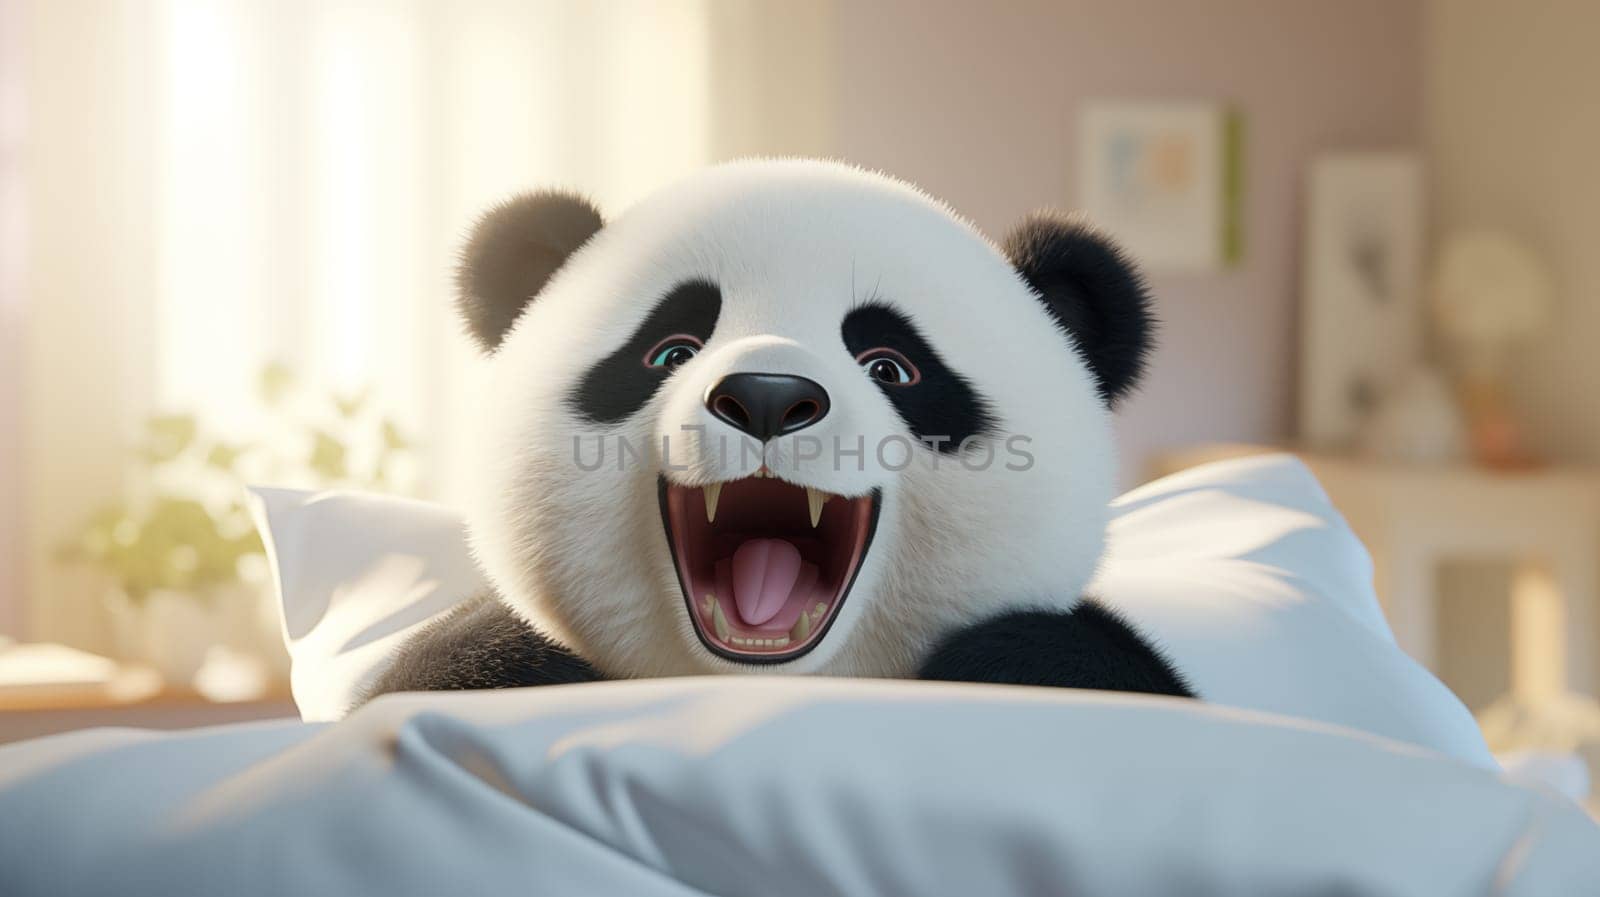 Funny happy panda, lie in a white bed, in the morning light, in front of the window.